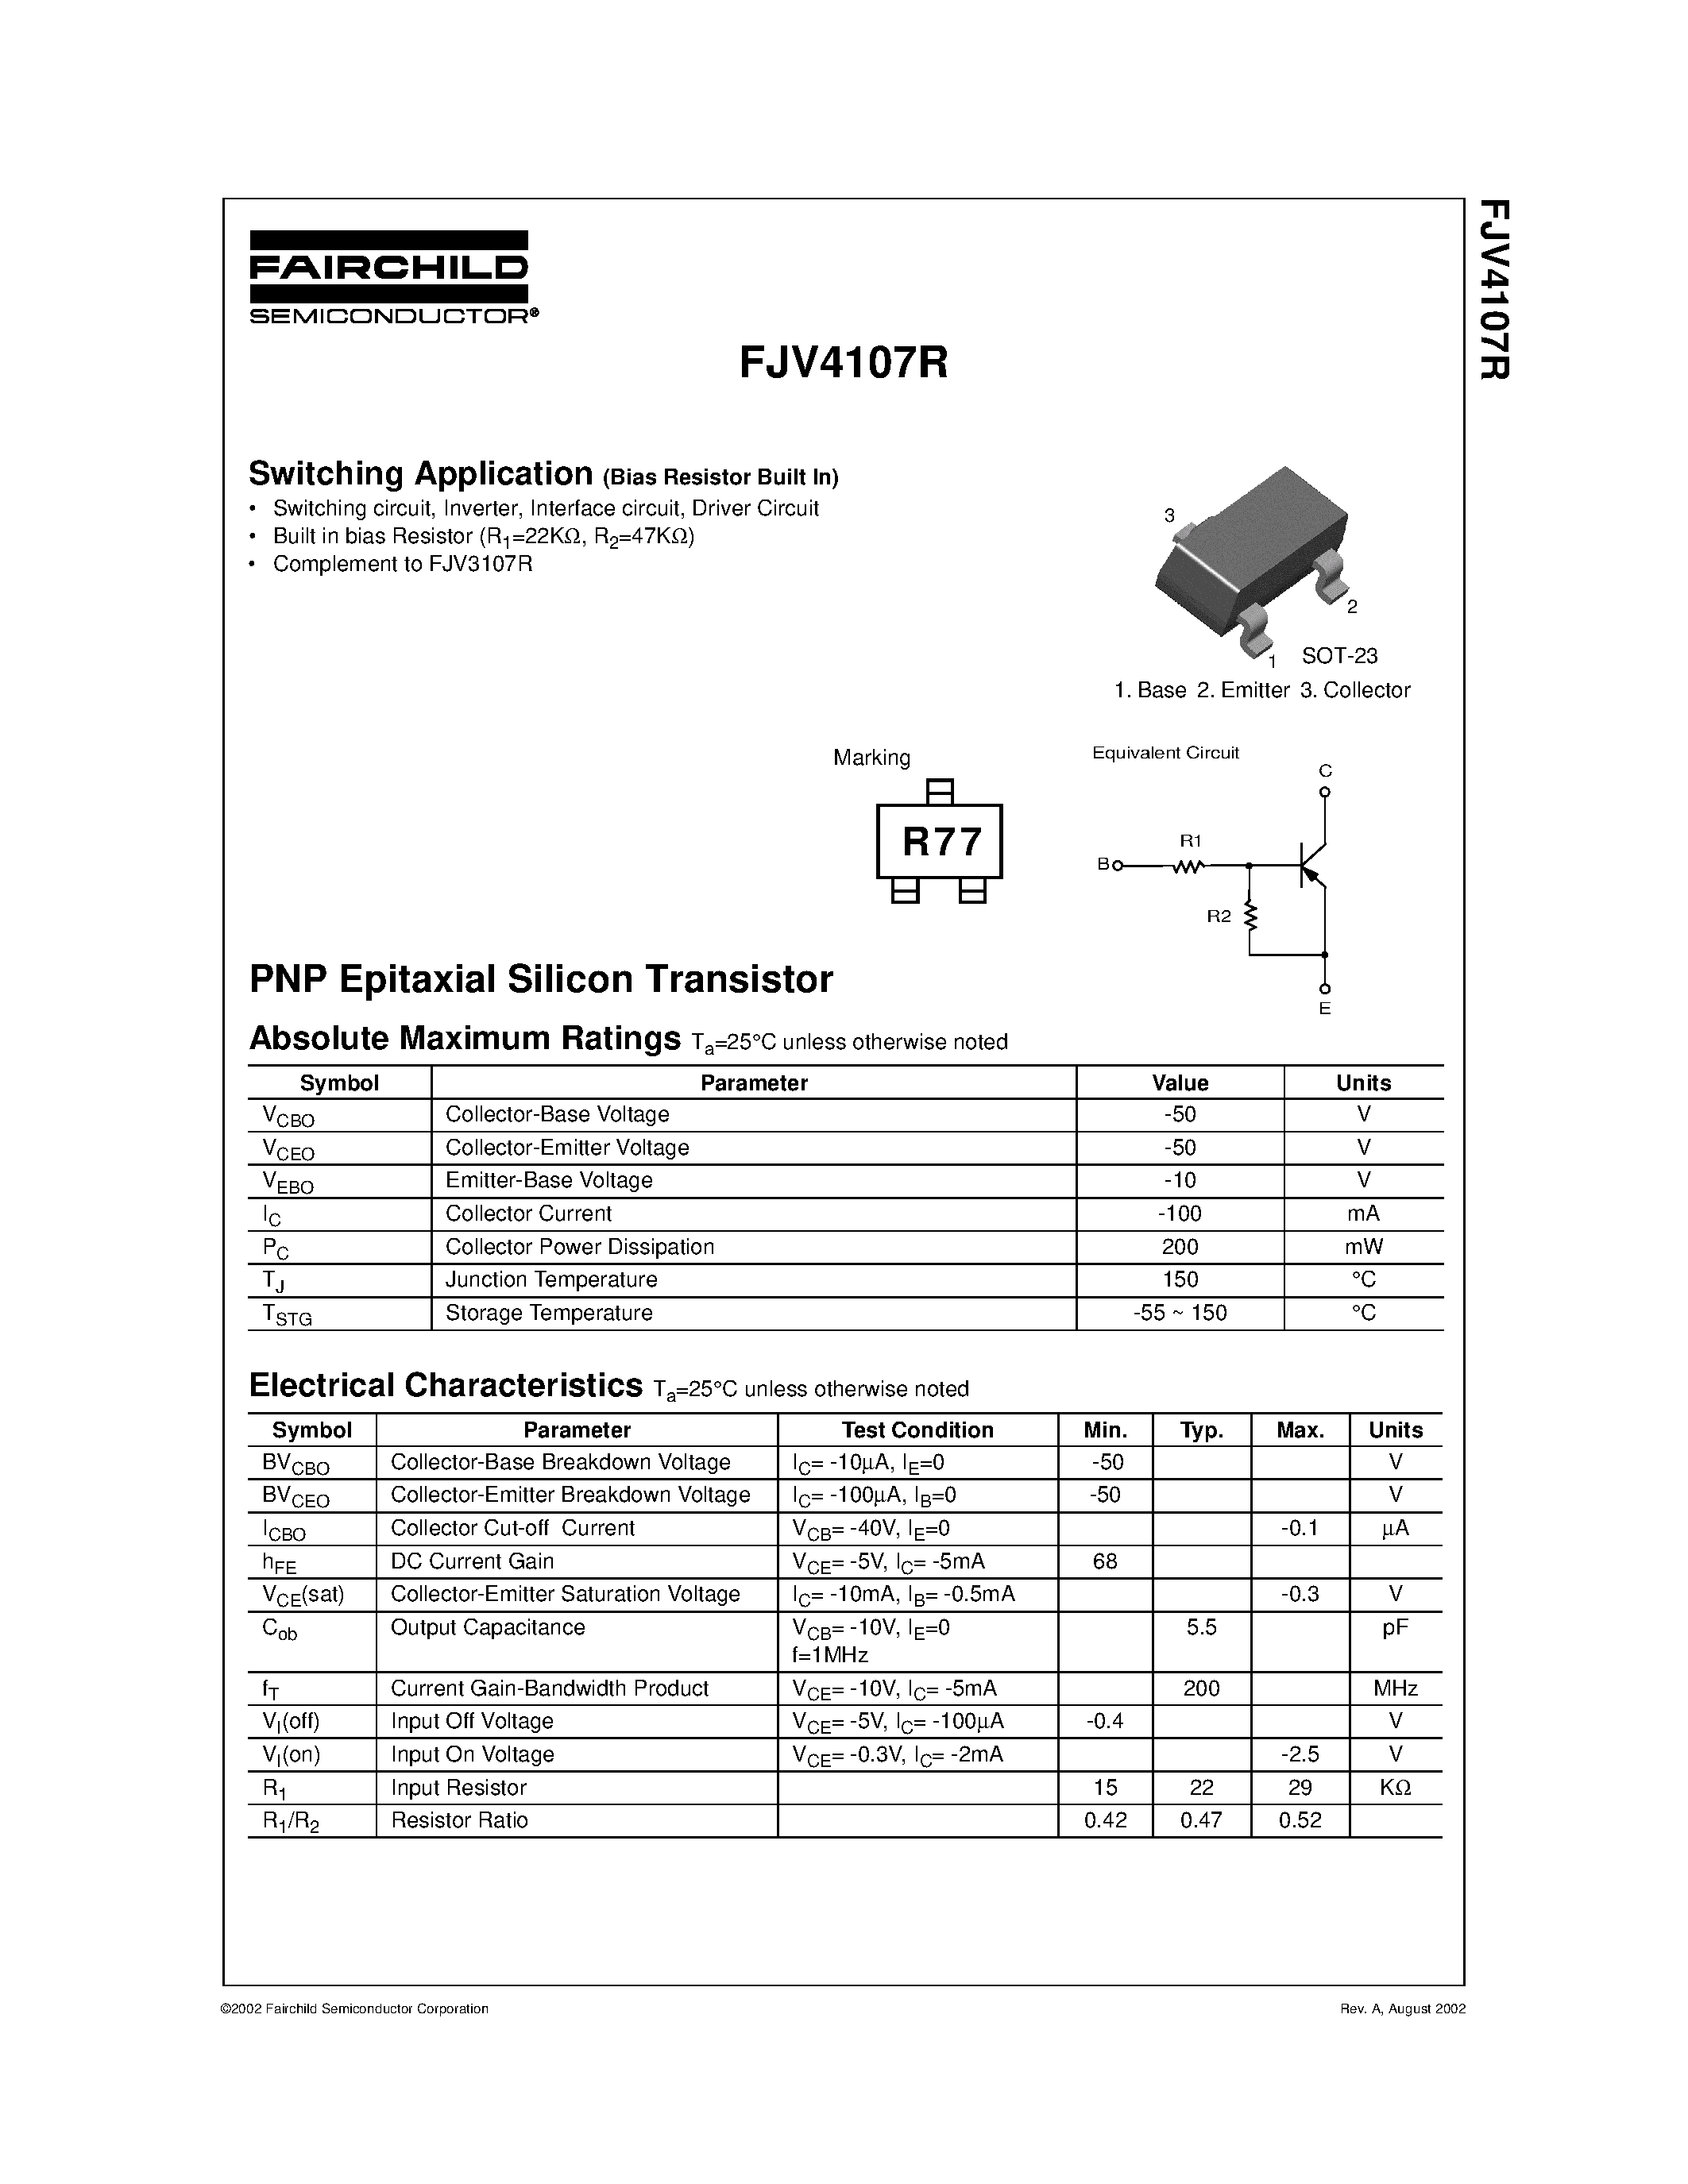 Даташит FJV4107R - PNP Epitaxial Silicon Transistor страница 1